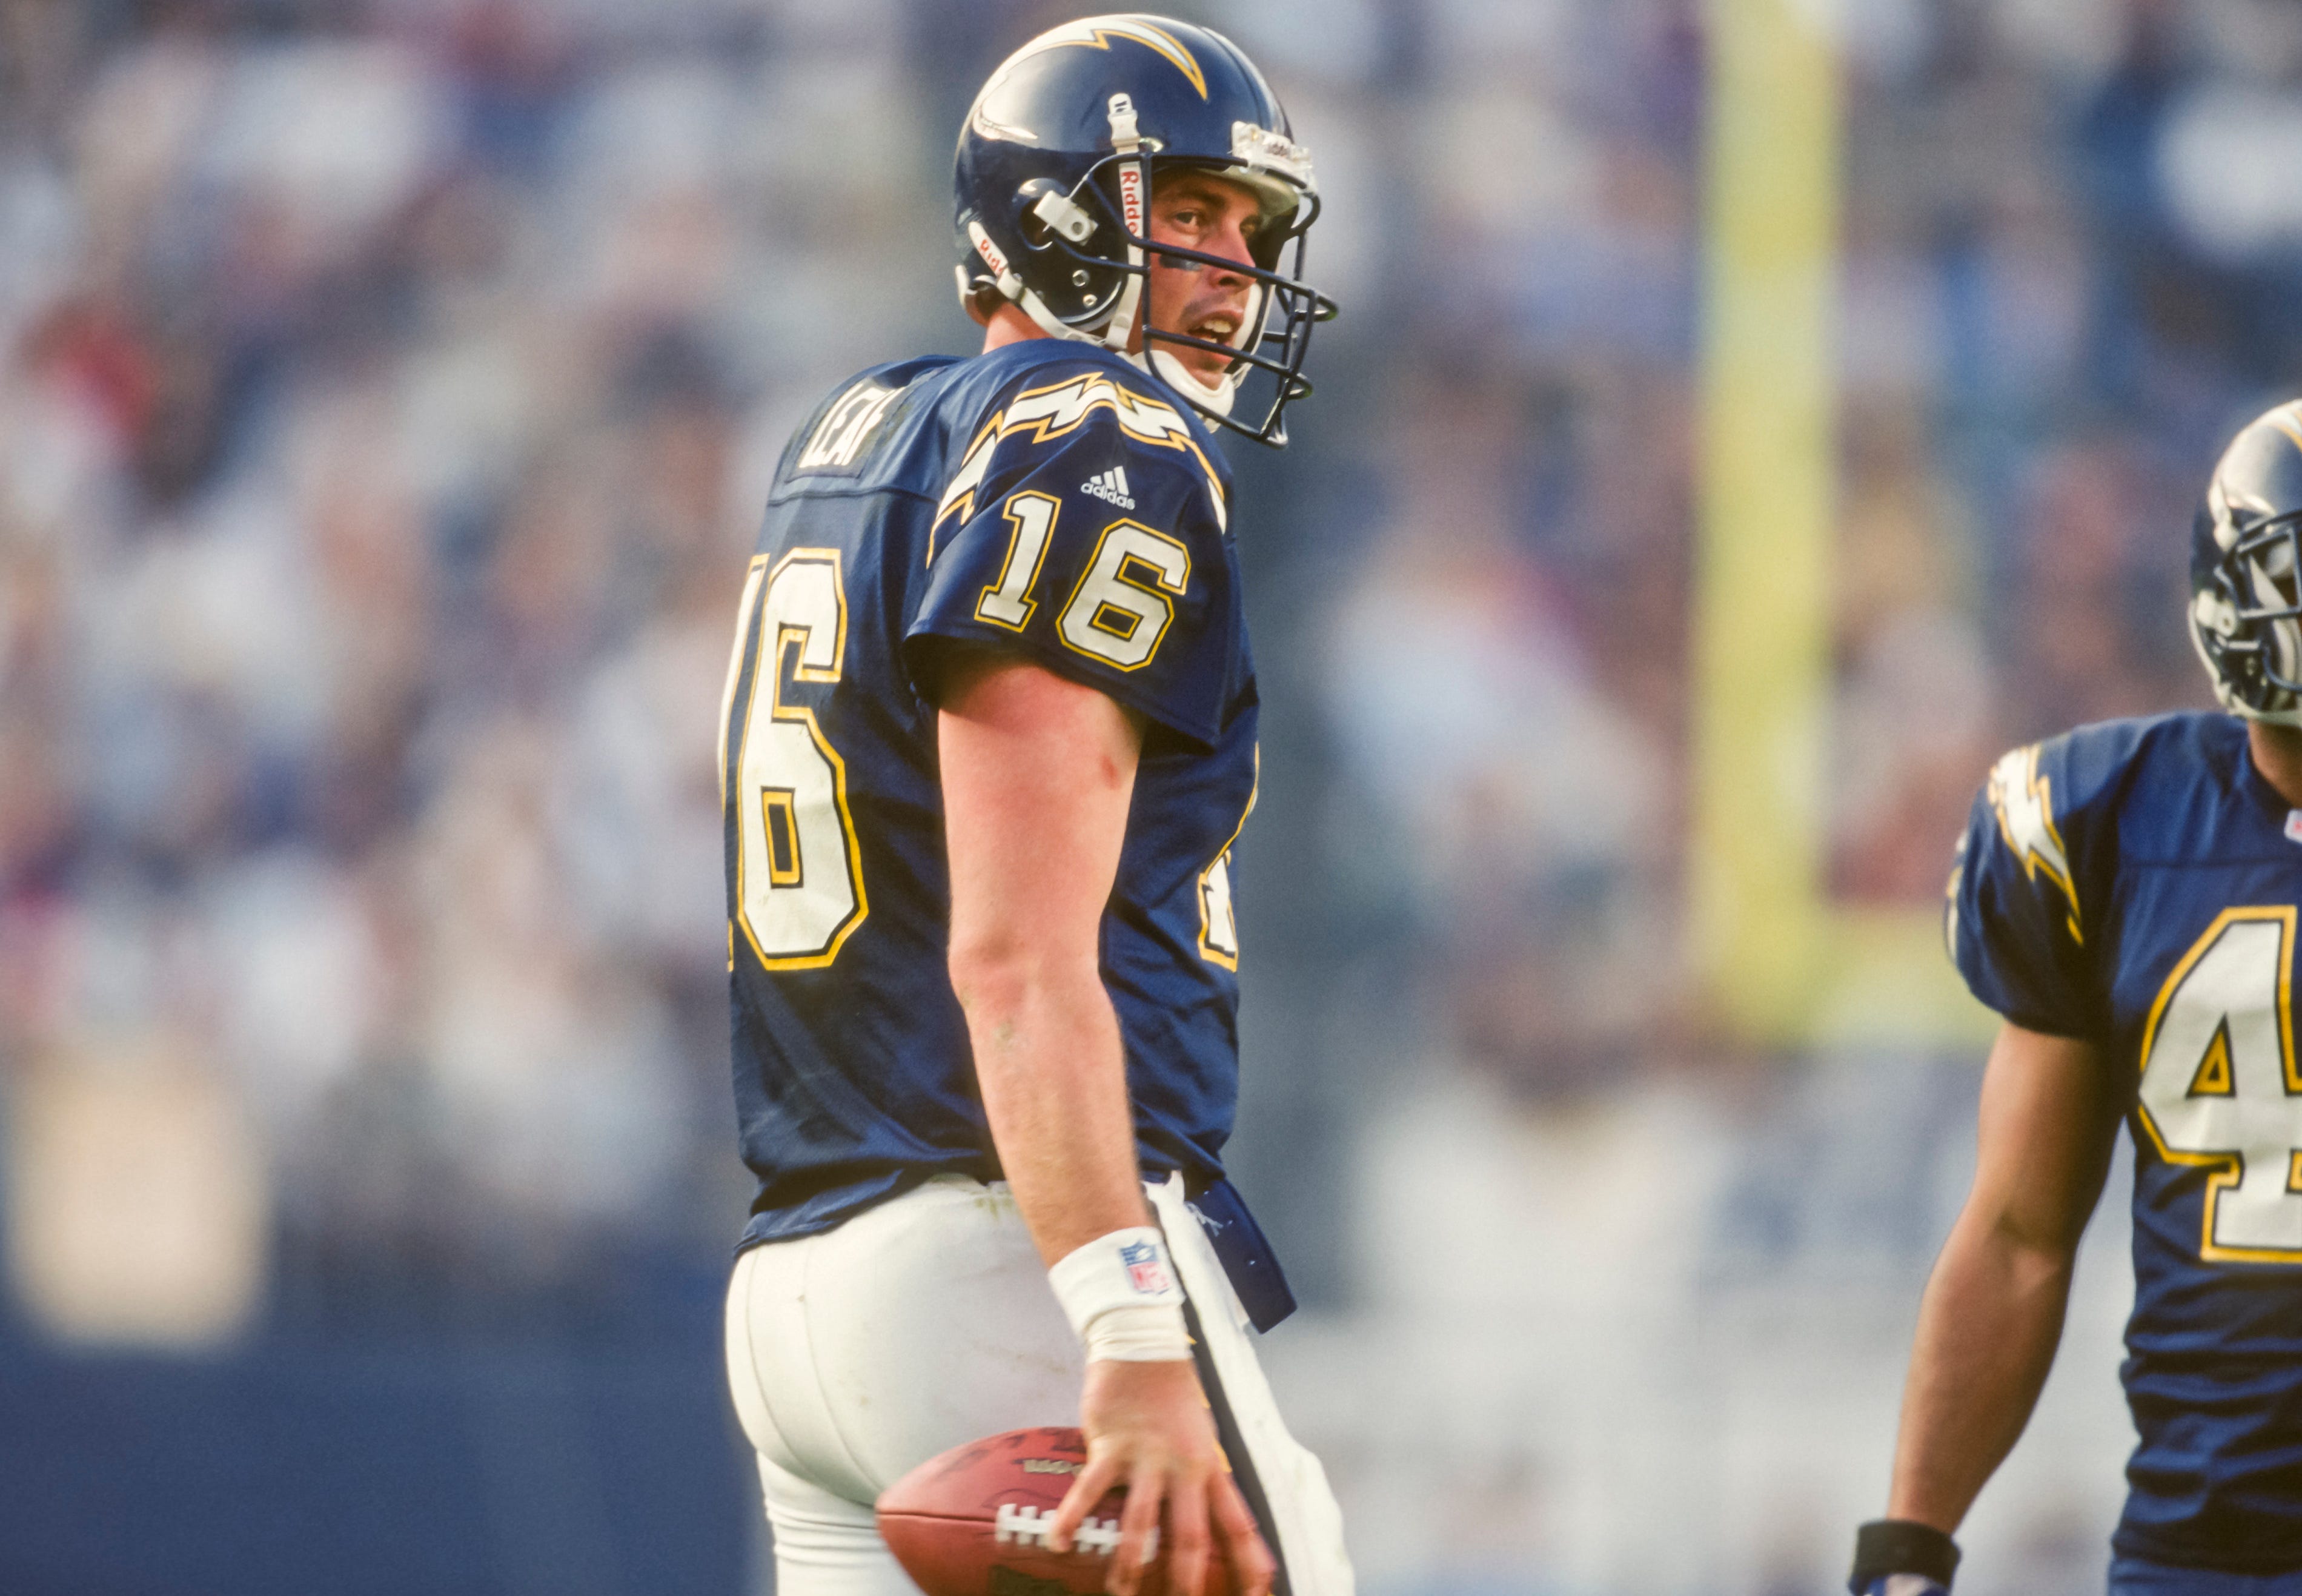 From the NFL to Prison, the story of Ryan Leaf.